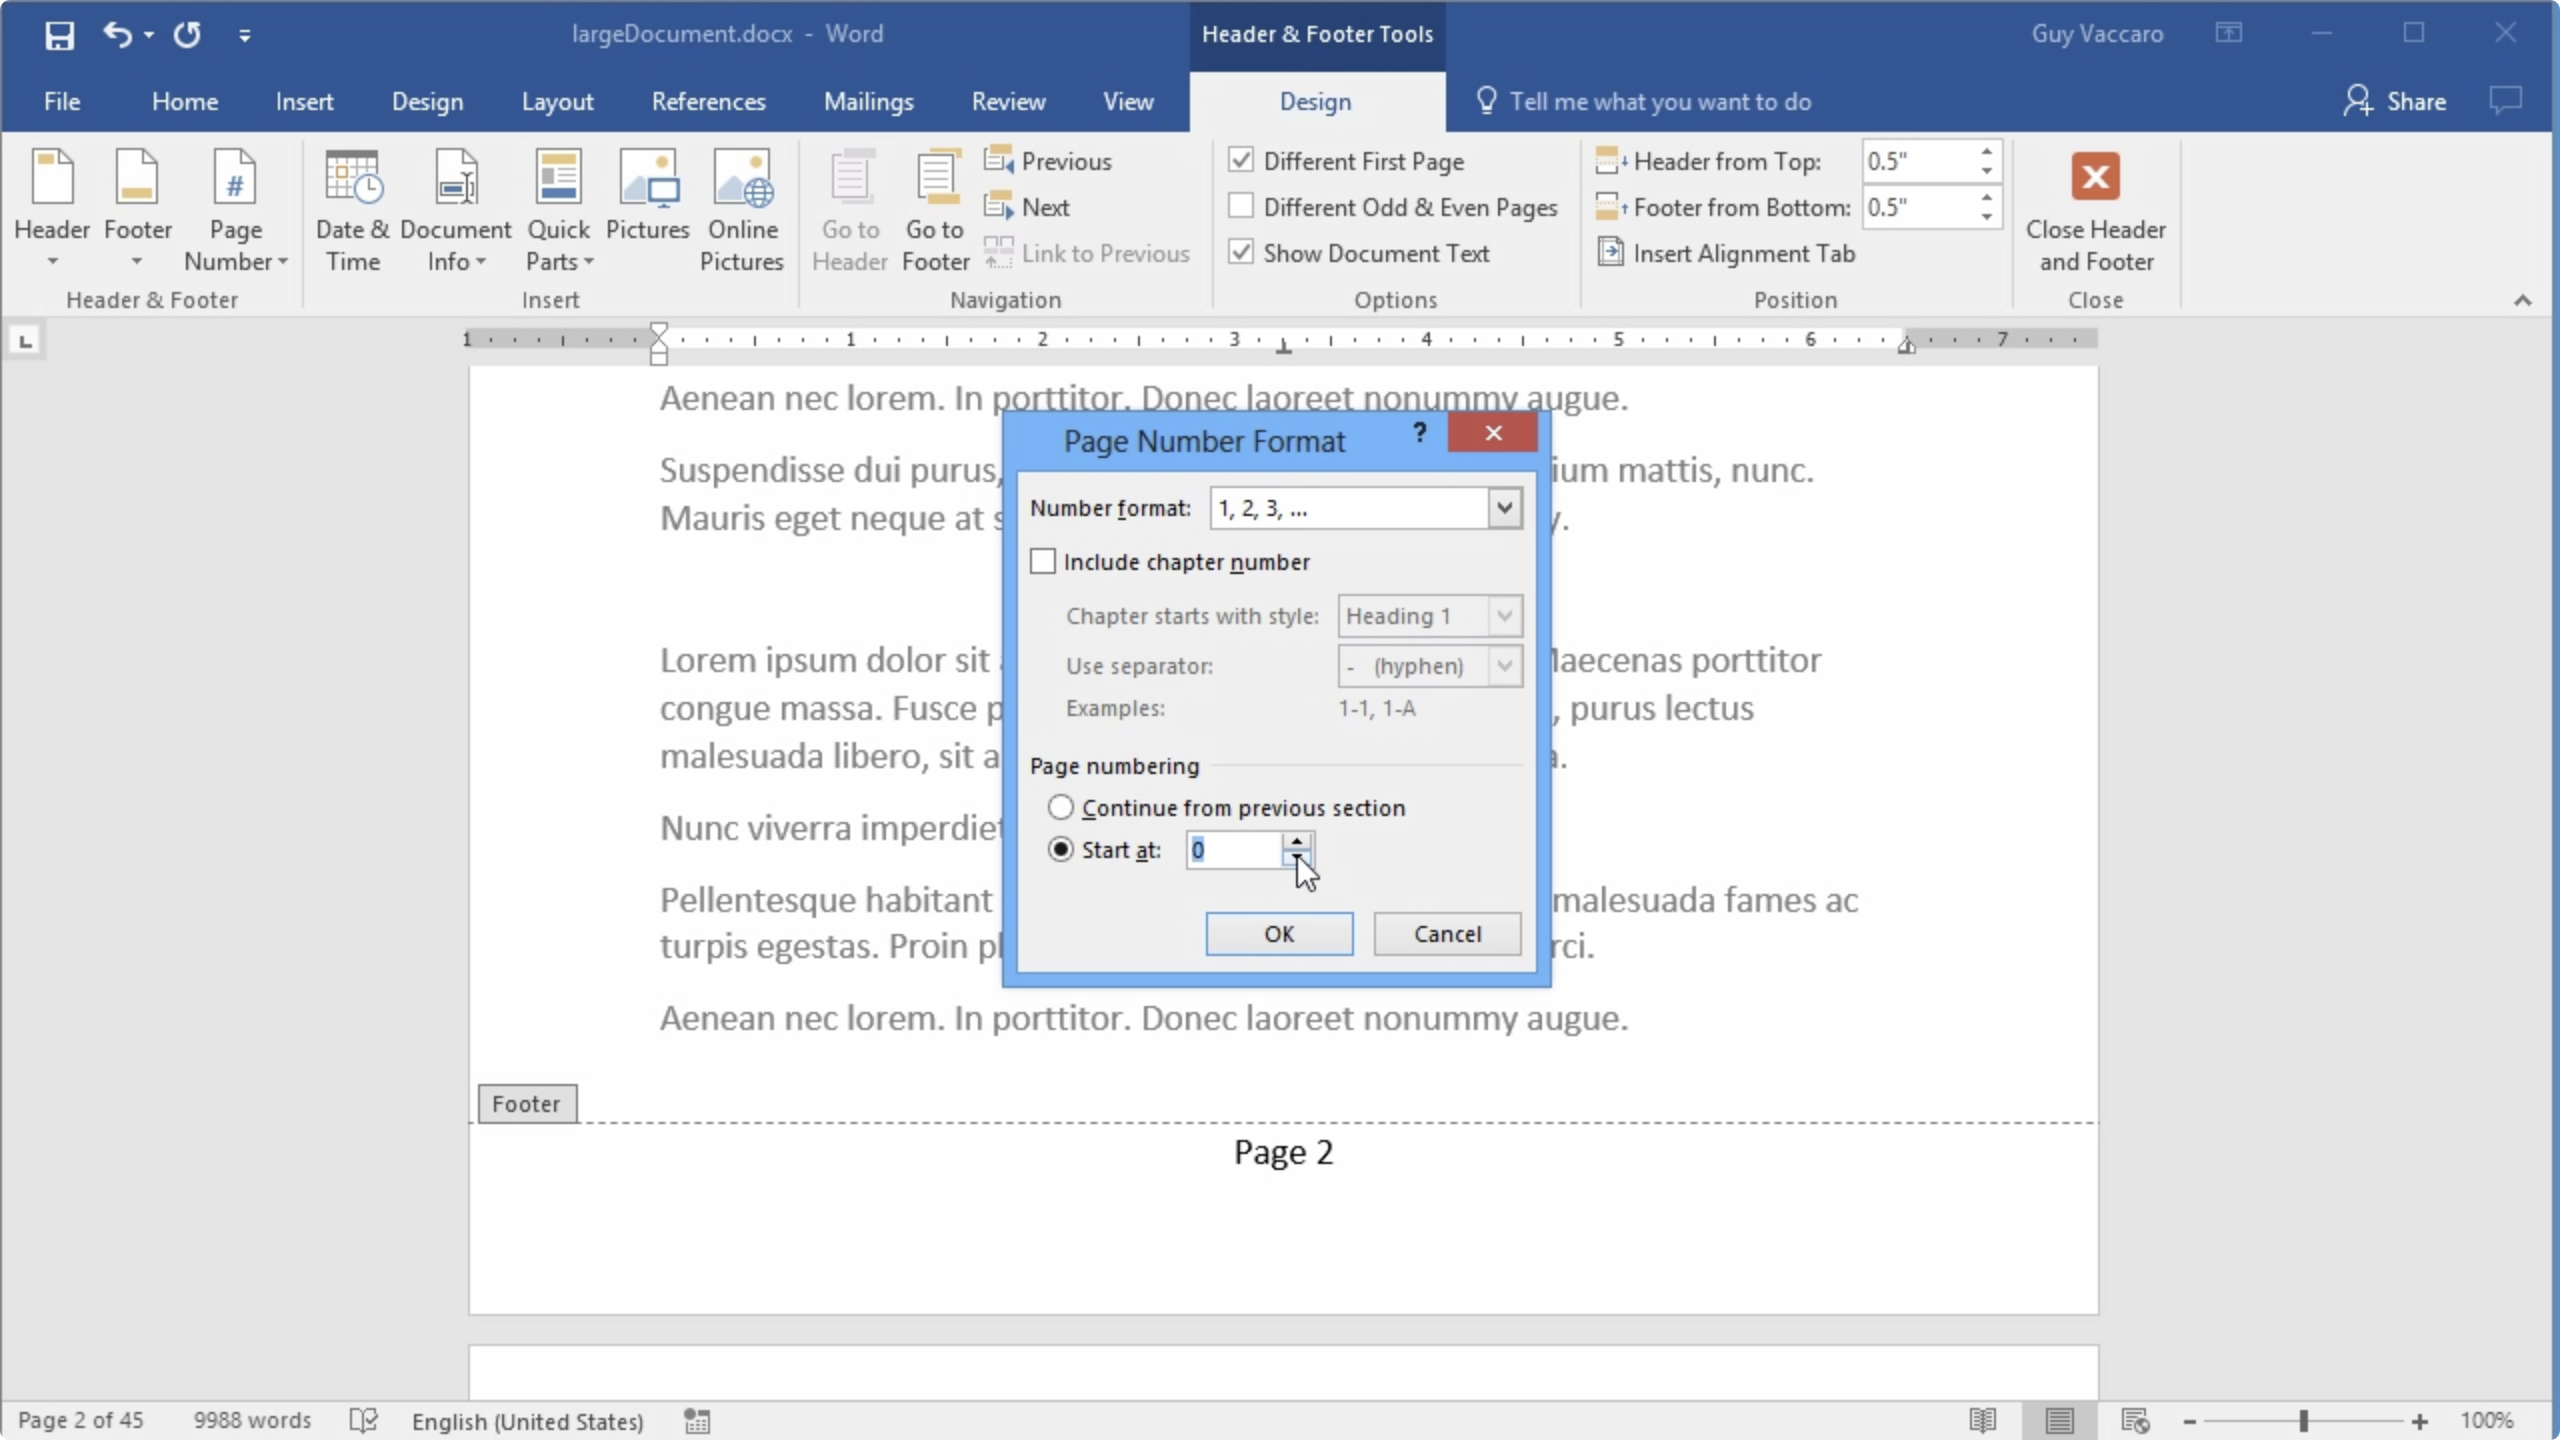 Screen from "How can I have different headers and footers on pages in my Microsoft Word 2016 document?"